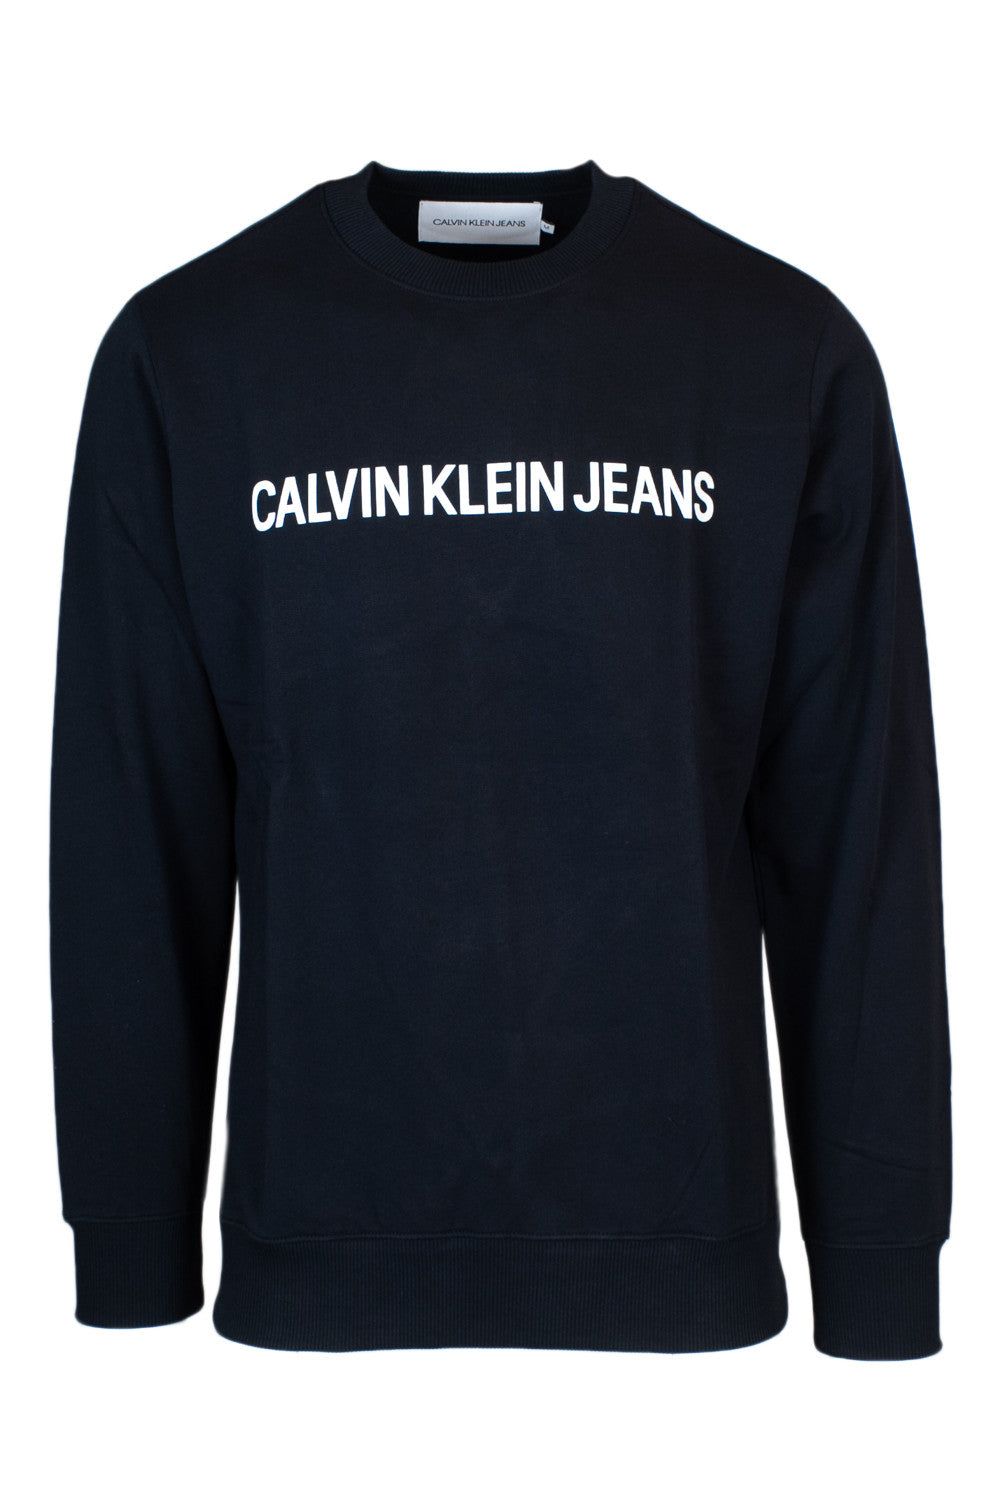 Brand: Calvin Klein Jeans
Gender: Men
Type: Sweatshirts
Season: Fall/Winter

PRODUCT DETAIL
• Color: black
• Pattern: print
• Fastening: slip on
• Sleeves: long
• Neckline: round neck

COMPOSITION AND MATERIAL
• Composition: -100% cotton 
•  Washing: machine wash at 30°